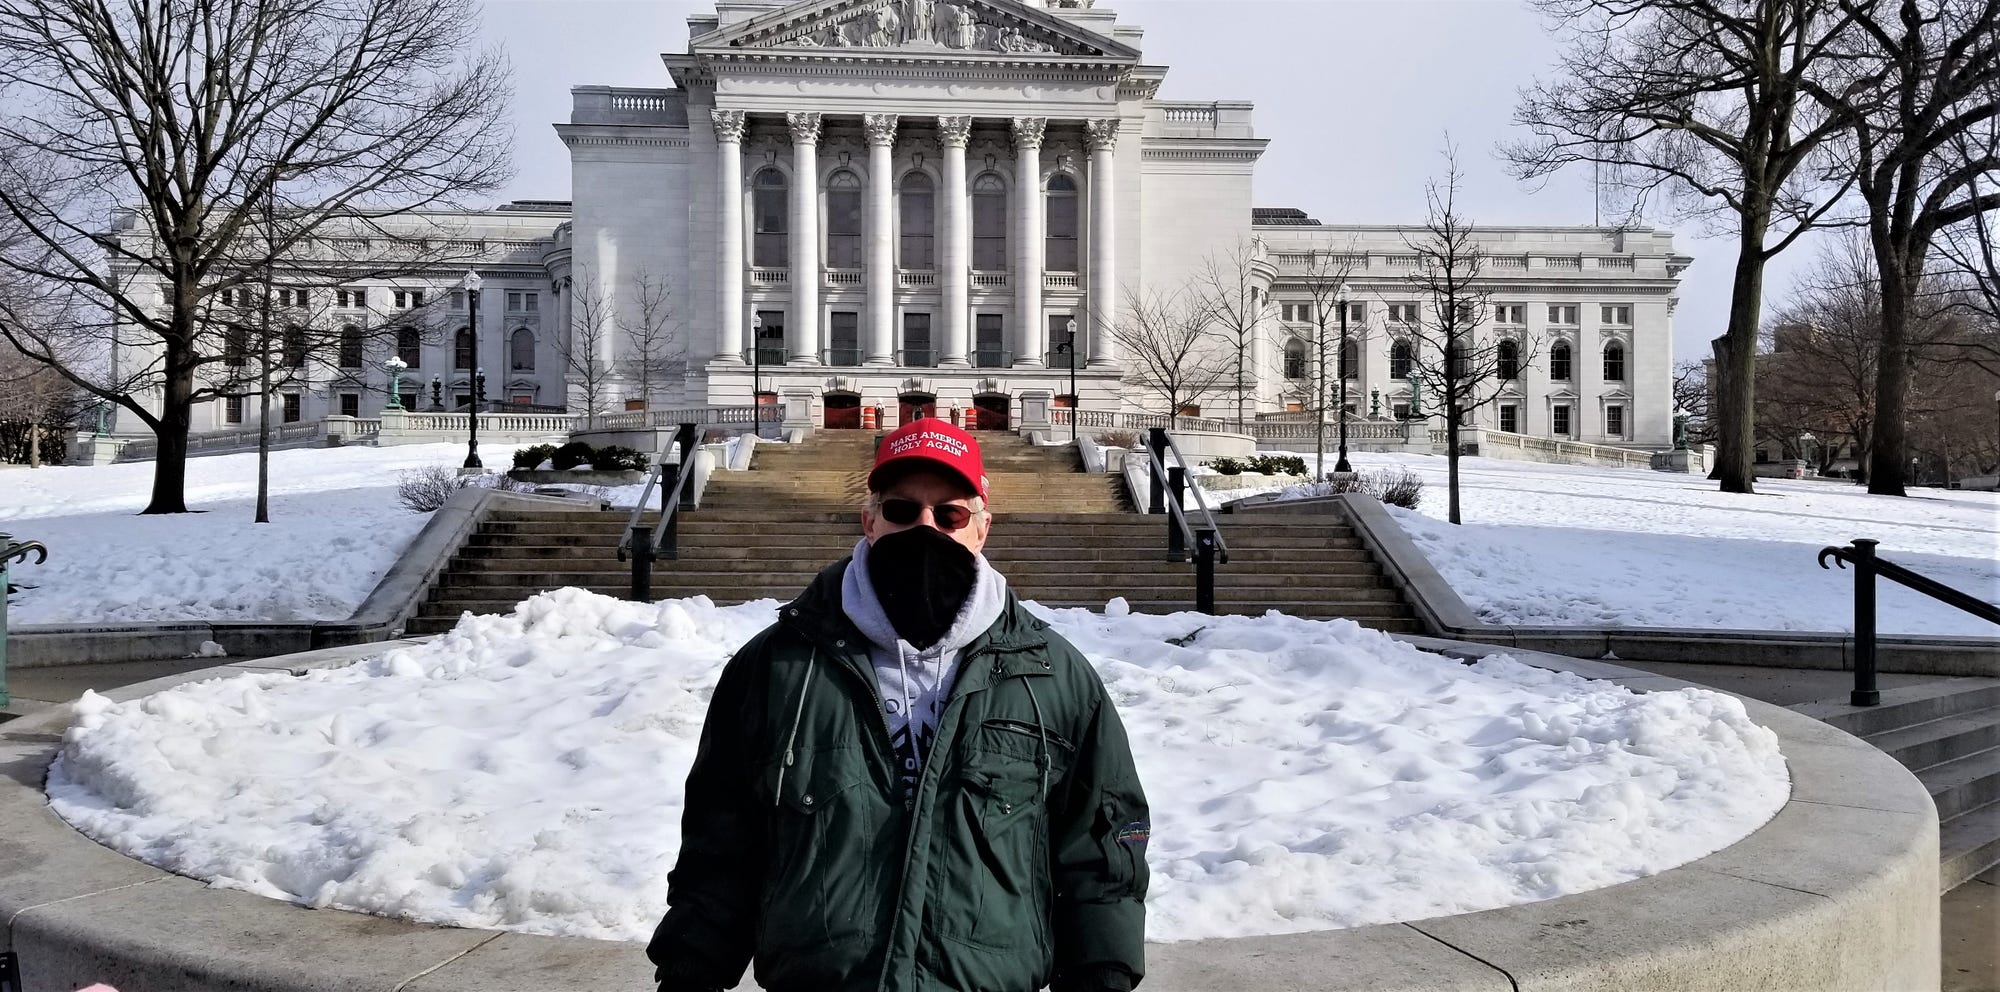 Ronald Faust, a supporter of President Trump, standing by the Capitol building in Madison, Wisconsin. Kay Nolan for Insider